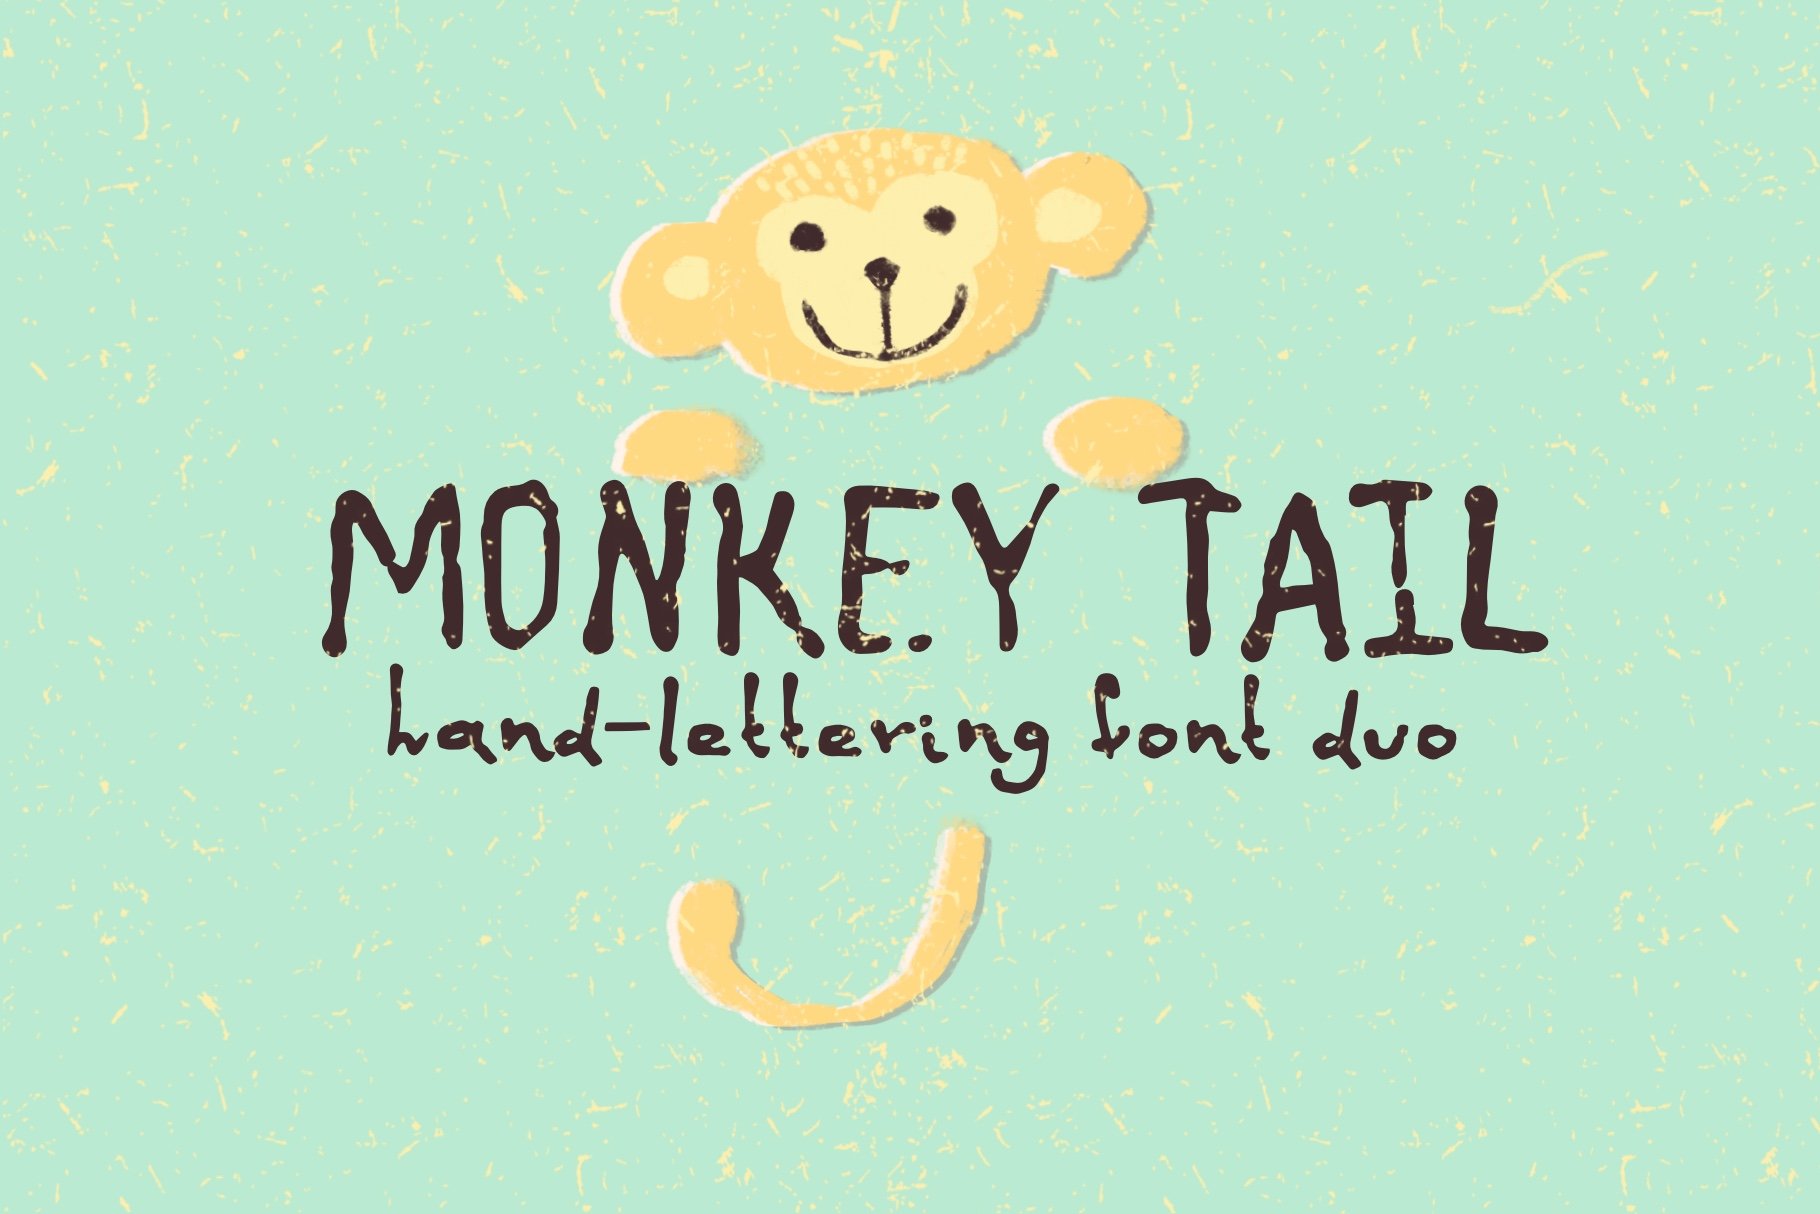 Monkey tail. Handwritten font. cover image.